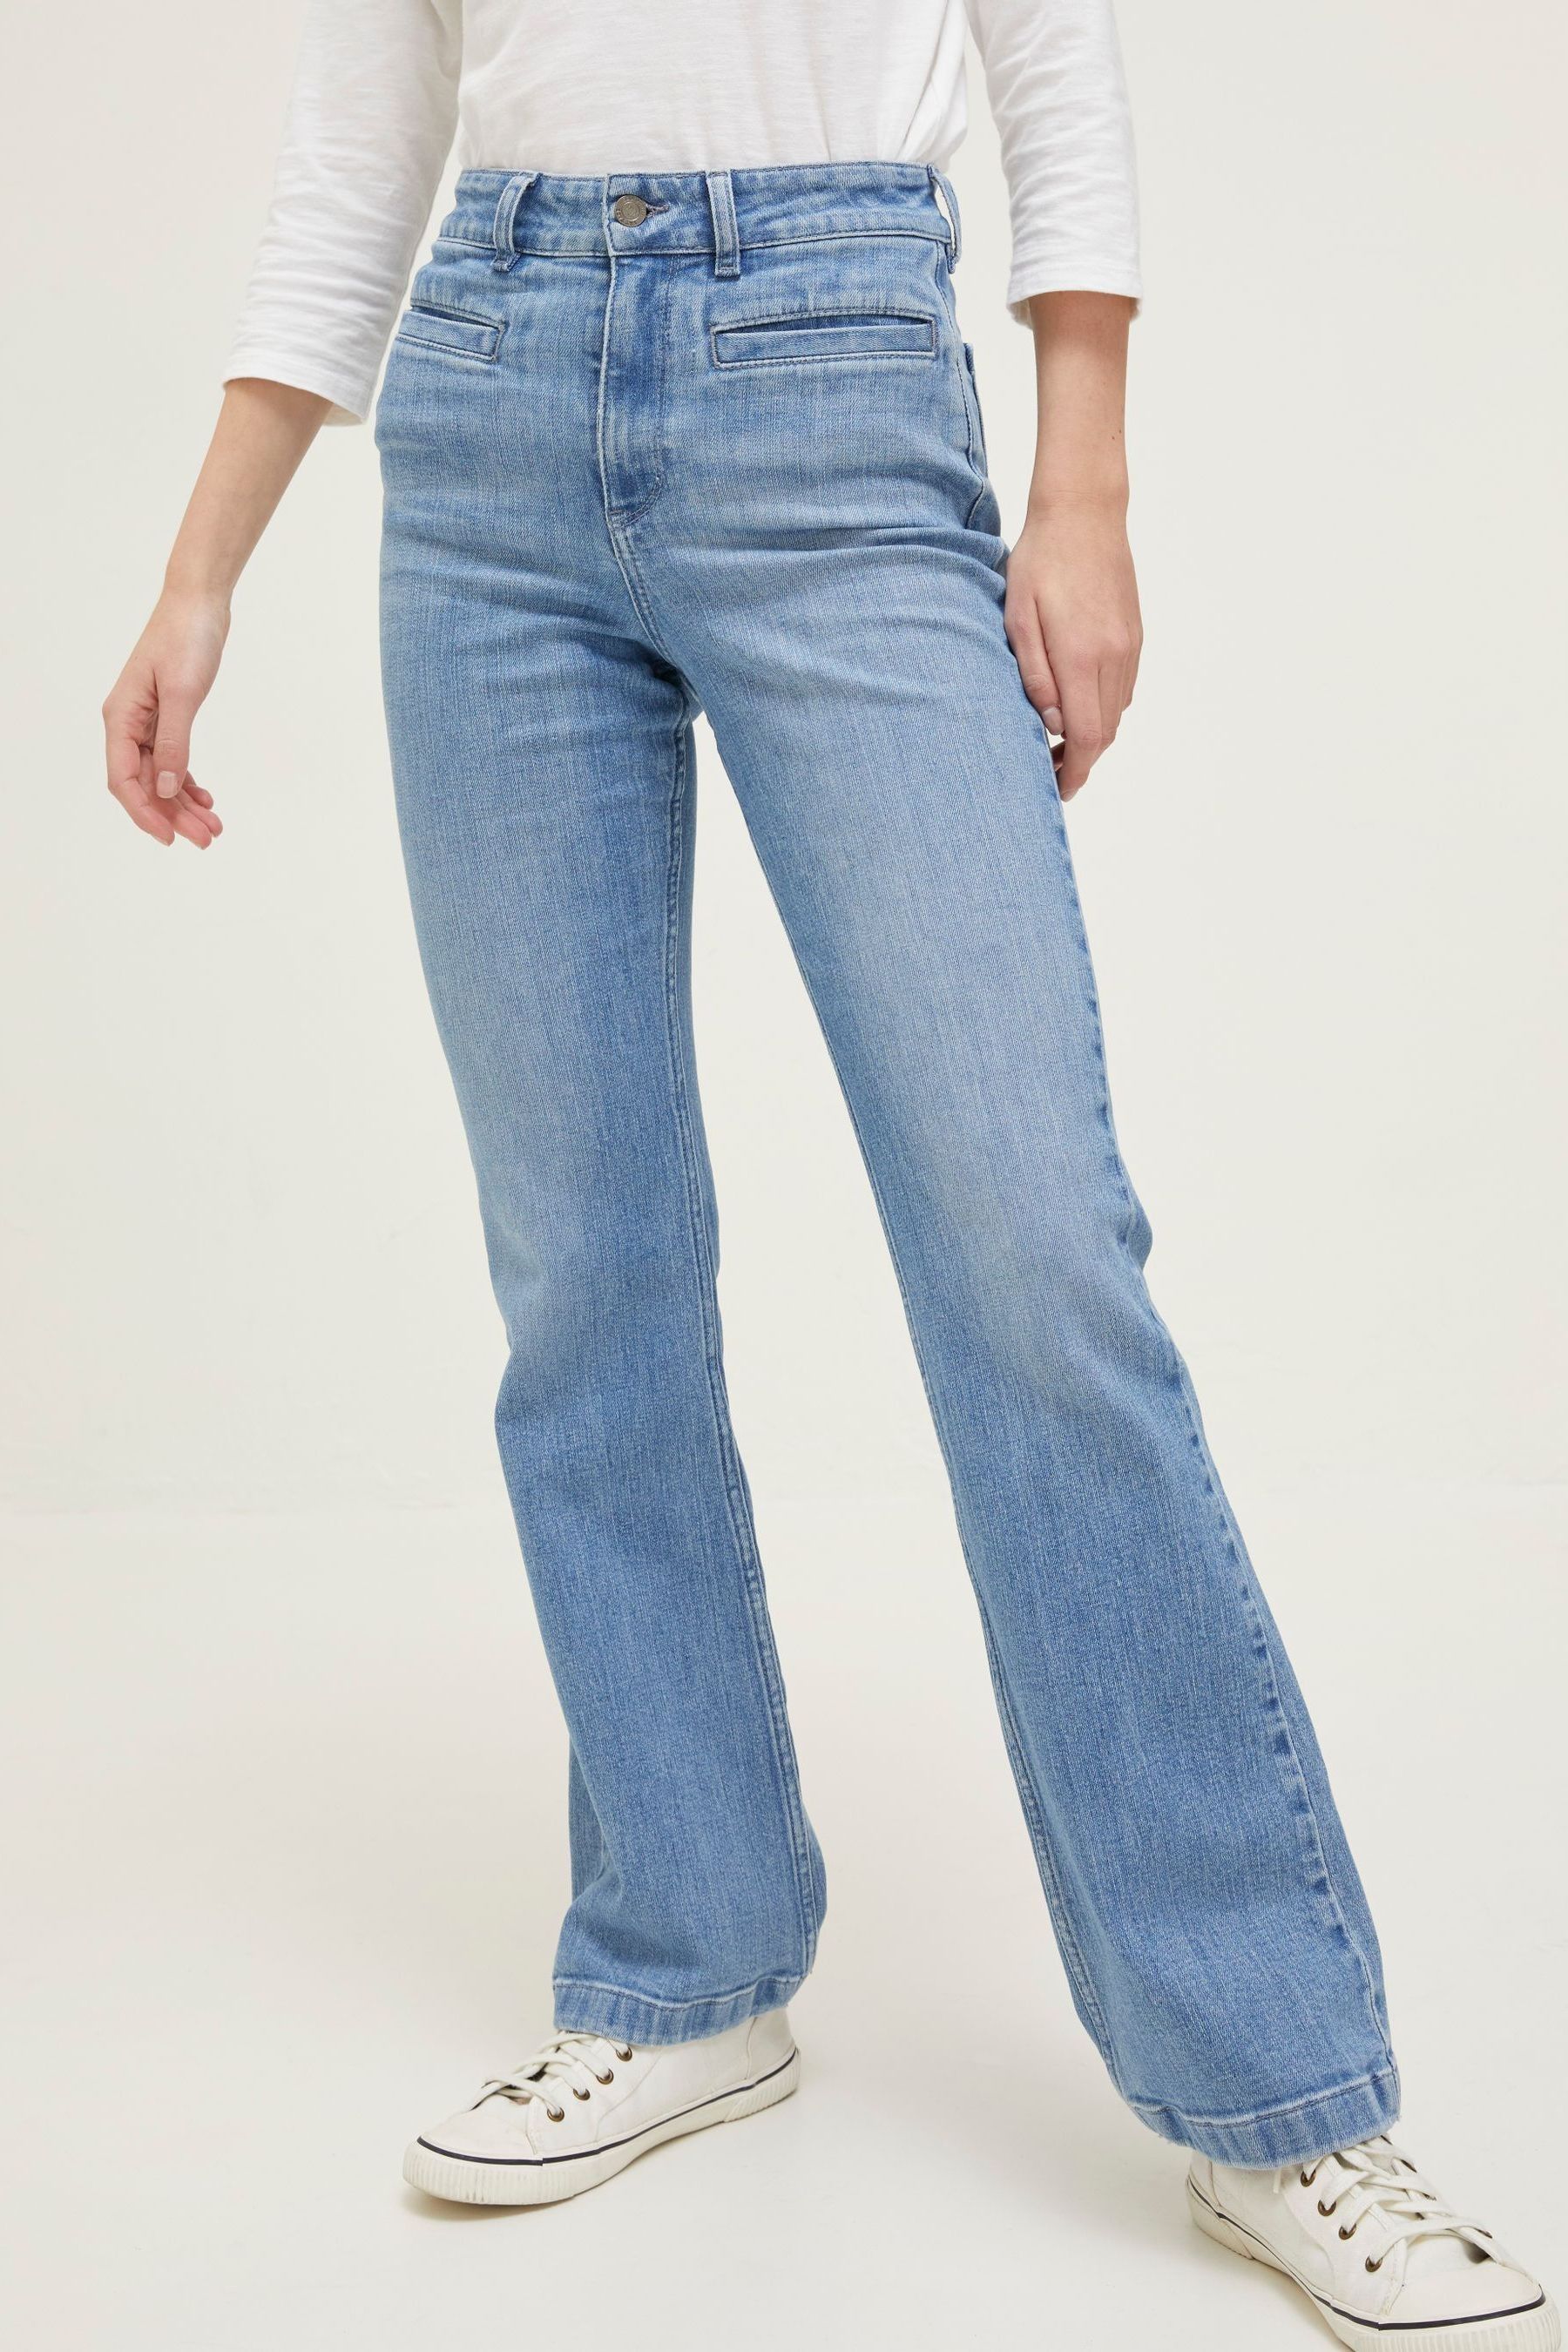 Buy FatFace Blue Fly Flare Jeans from the Next UK online shop